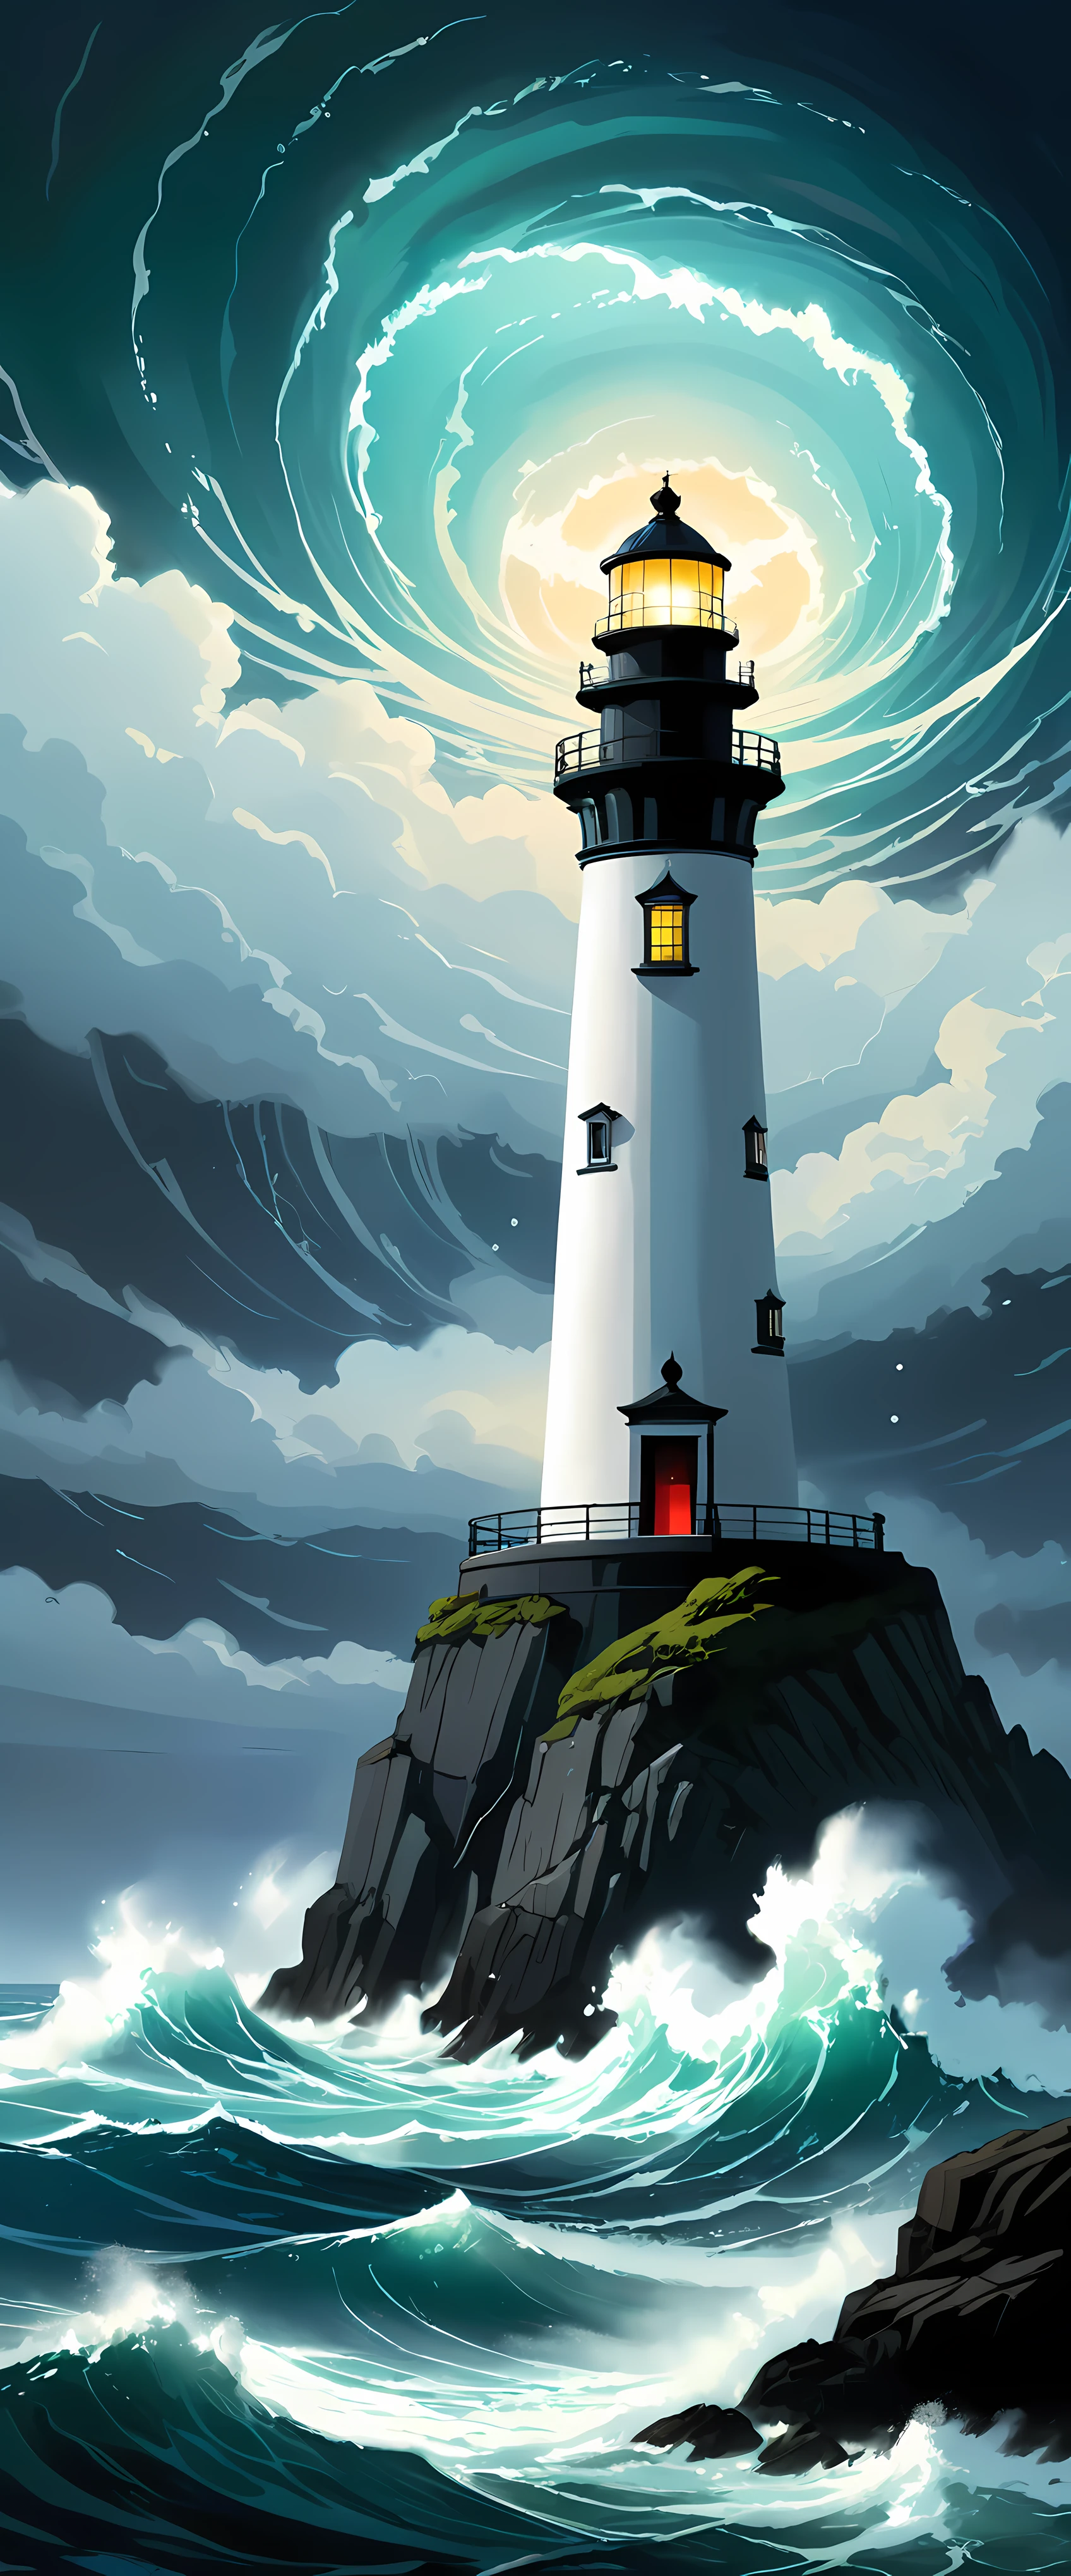 lighthouse, bright light, dark sea, dark night, shimmering waves, swirling mist, distant horizon, solitary structure, guiding beacon, towering height, ocean depths, powerful illumination, steady glow, unwavering beam, sweeping motion, tranquil waters, enchanting sight, maritime safety, constant vigilance, maritime symbol, maritime navigation, majestic presence, remote location, eerie silence, haunting beauty, mysterious aura, hidden dangers, hidden rocks, untamed nature, unforgiving sea, distant shore, lost sailors, lone traveler, hypnotic rhythm, ghostly apparitions, timeless charm, stoic resilience, resolute strength, historical significance, maritime history, enduring legacy, capturing imaginations, inspiring tales, evocative atmosphere, lighthouse keeper, steadfast duty, undying devotion.